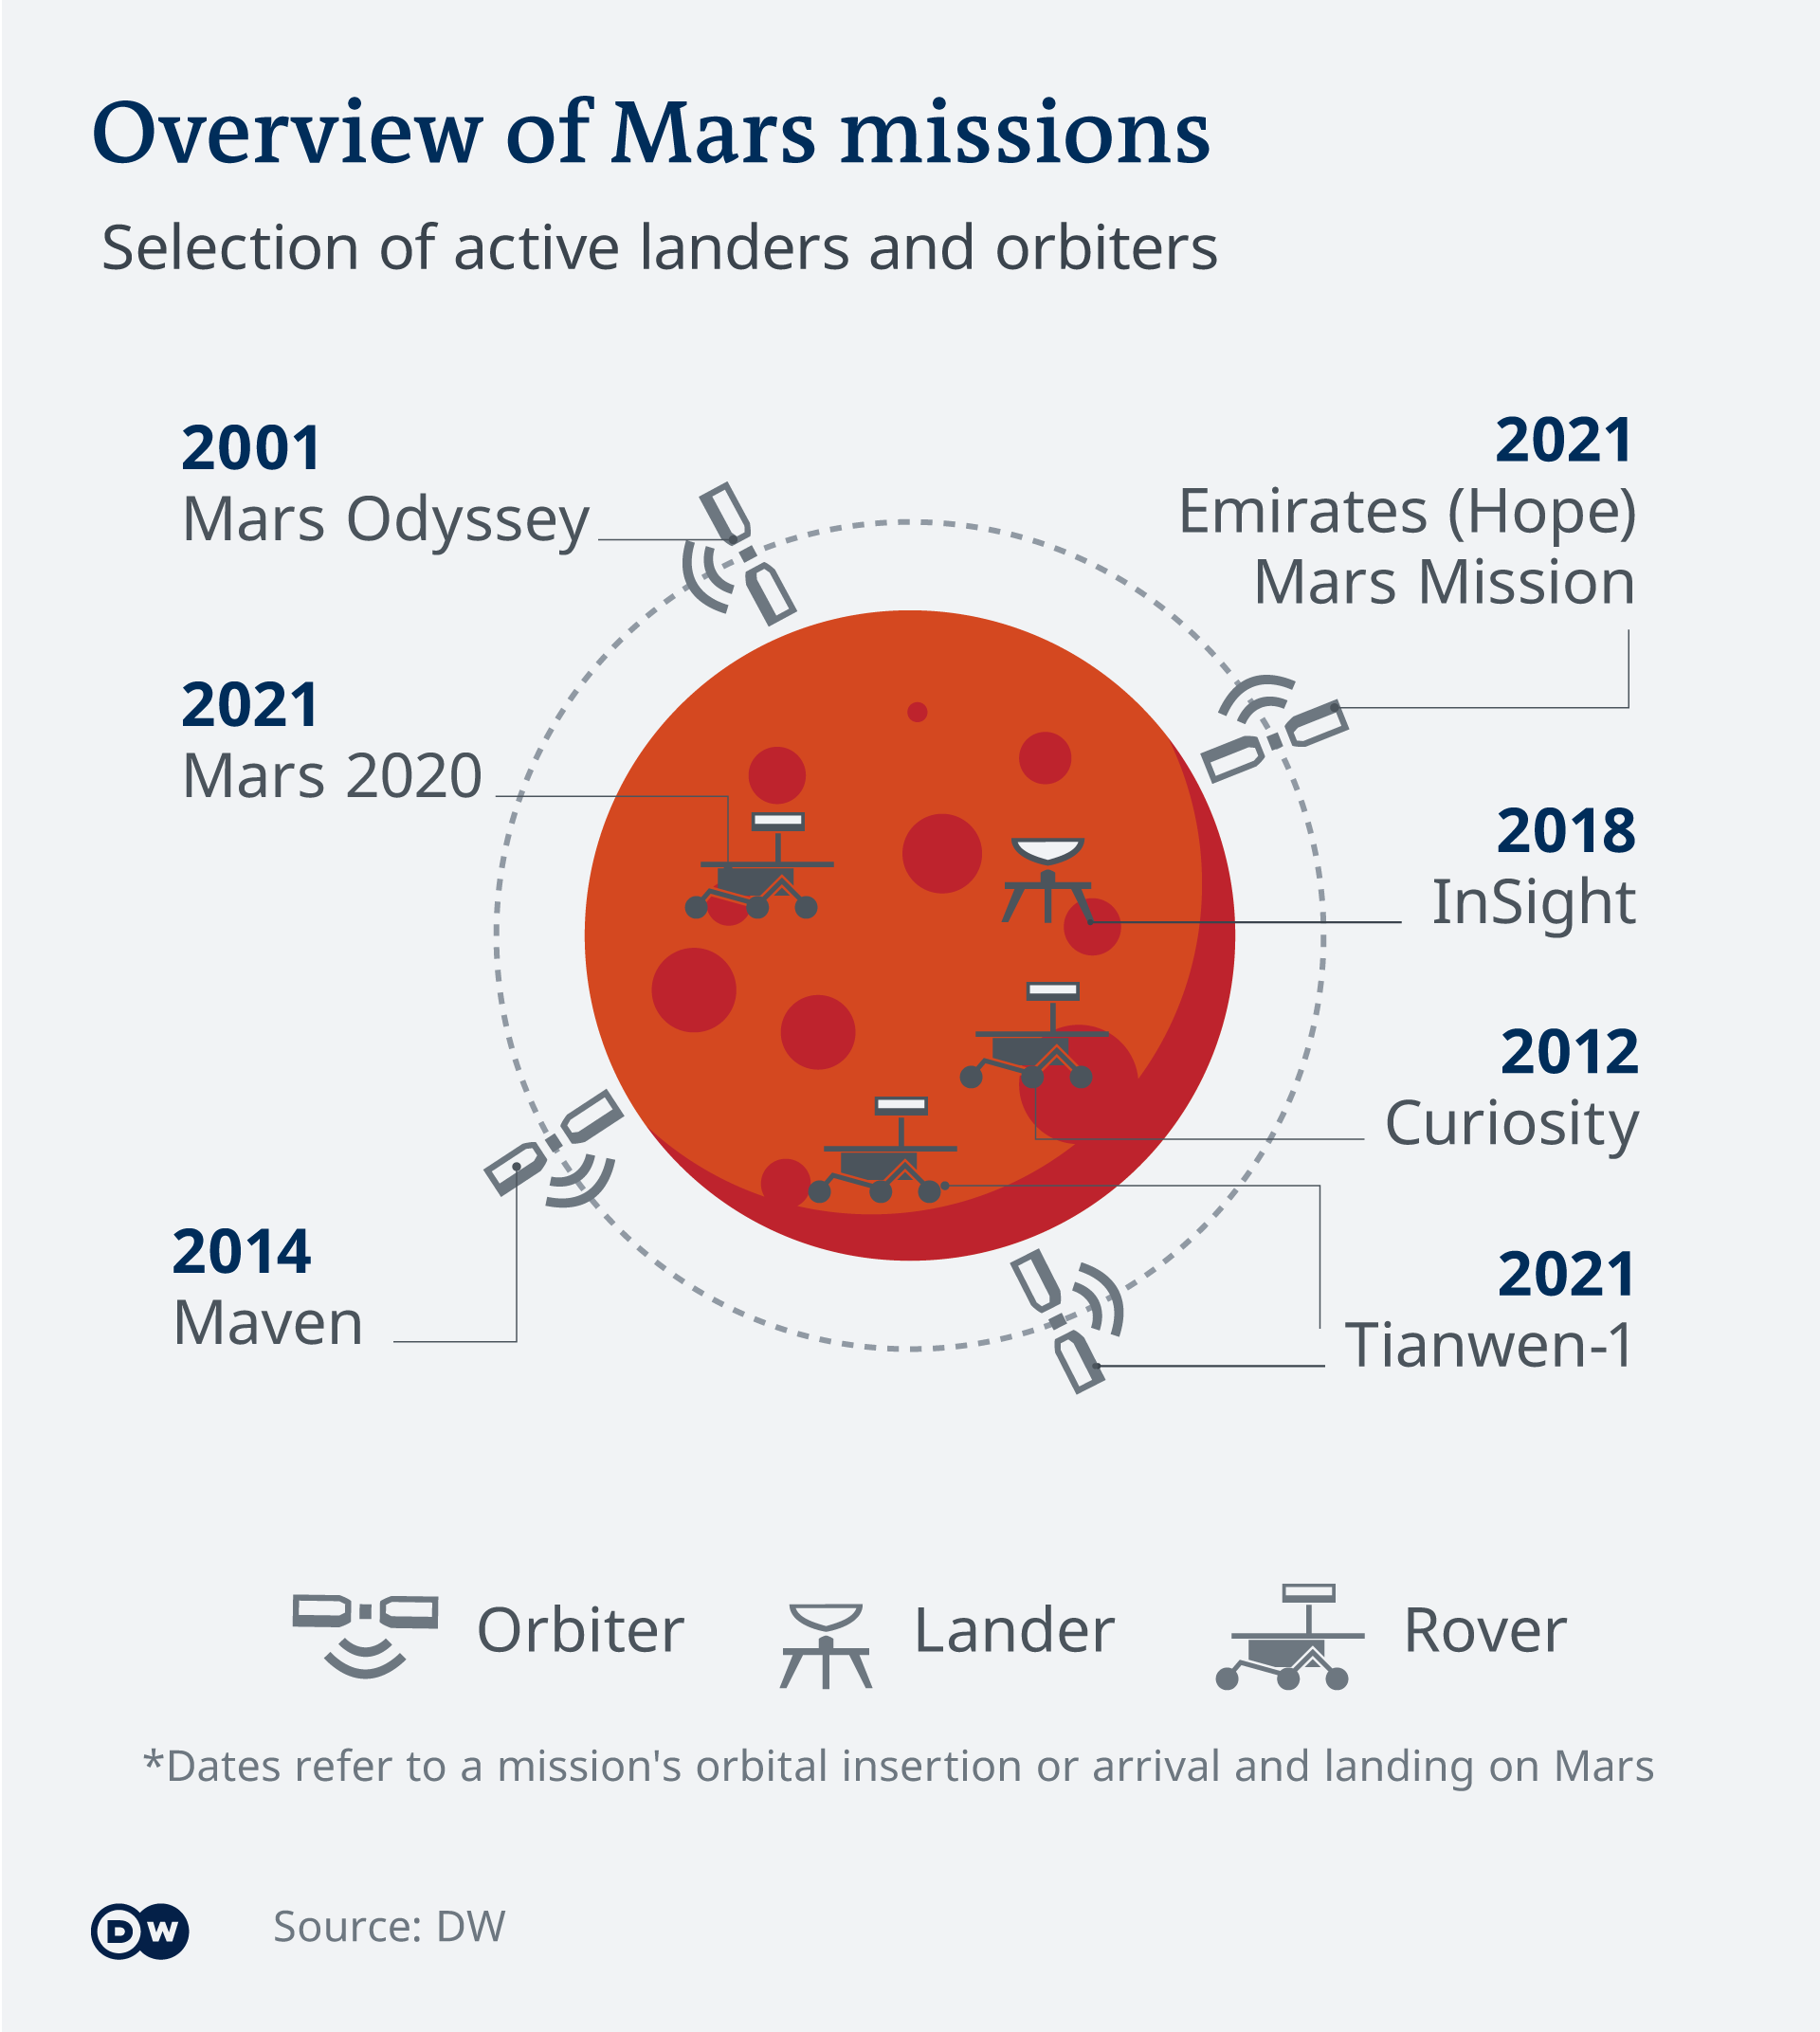 An infographic gives an overview of Mars missions